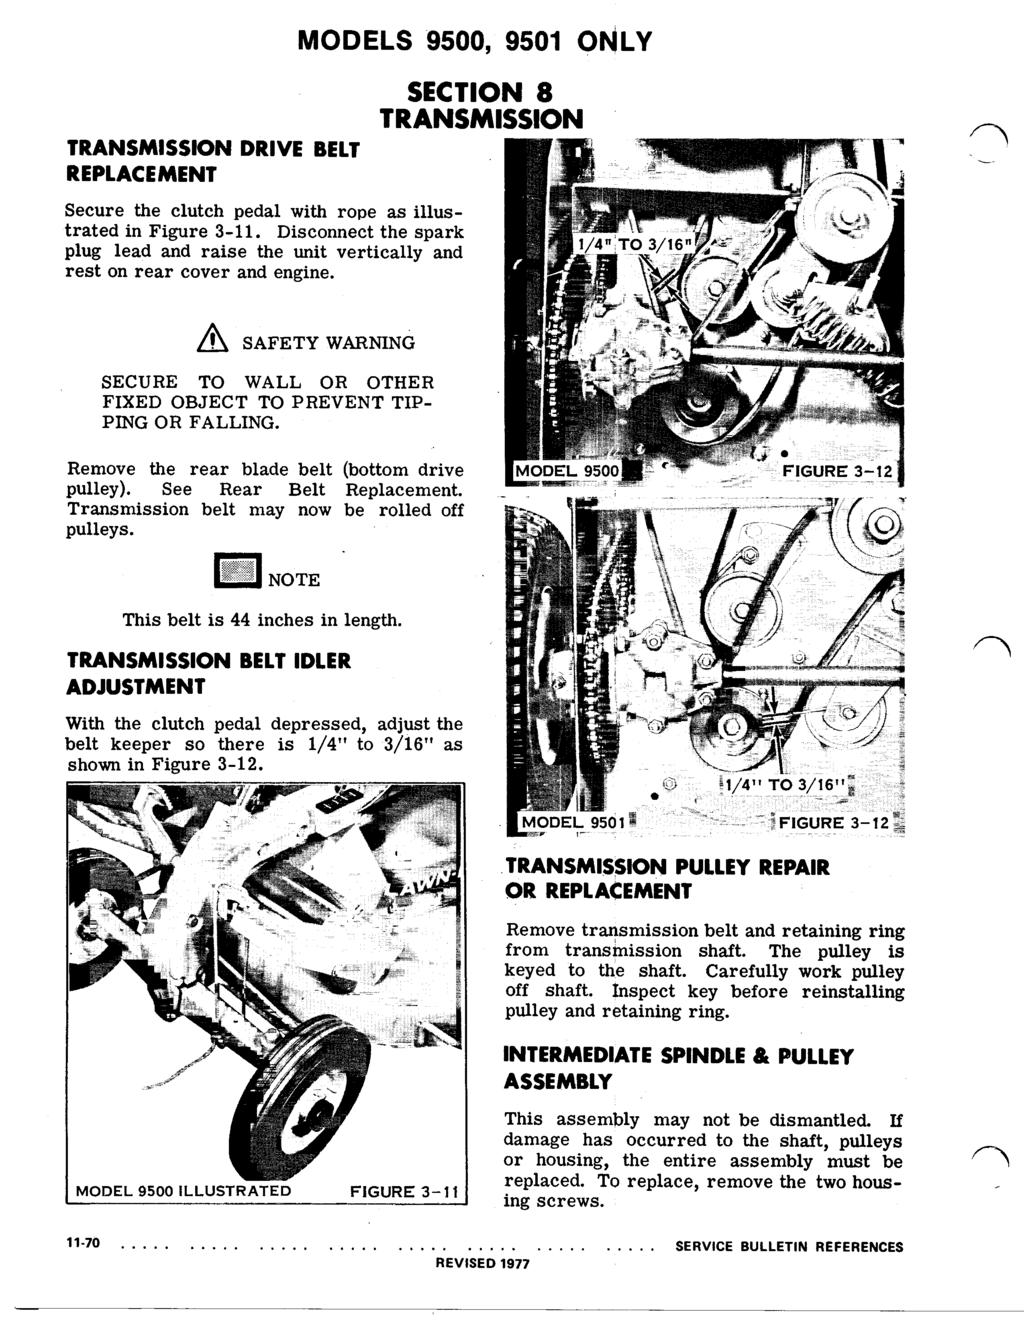 TRANSMISSION DRIVE BELT REPLACEMENT Secure the clutch pedal with rope as illustrated in Figure 3-11.